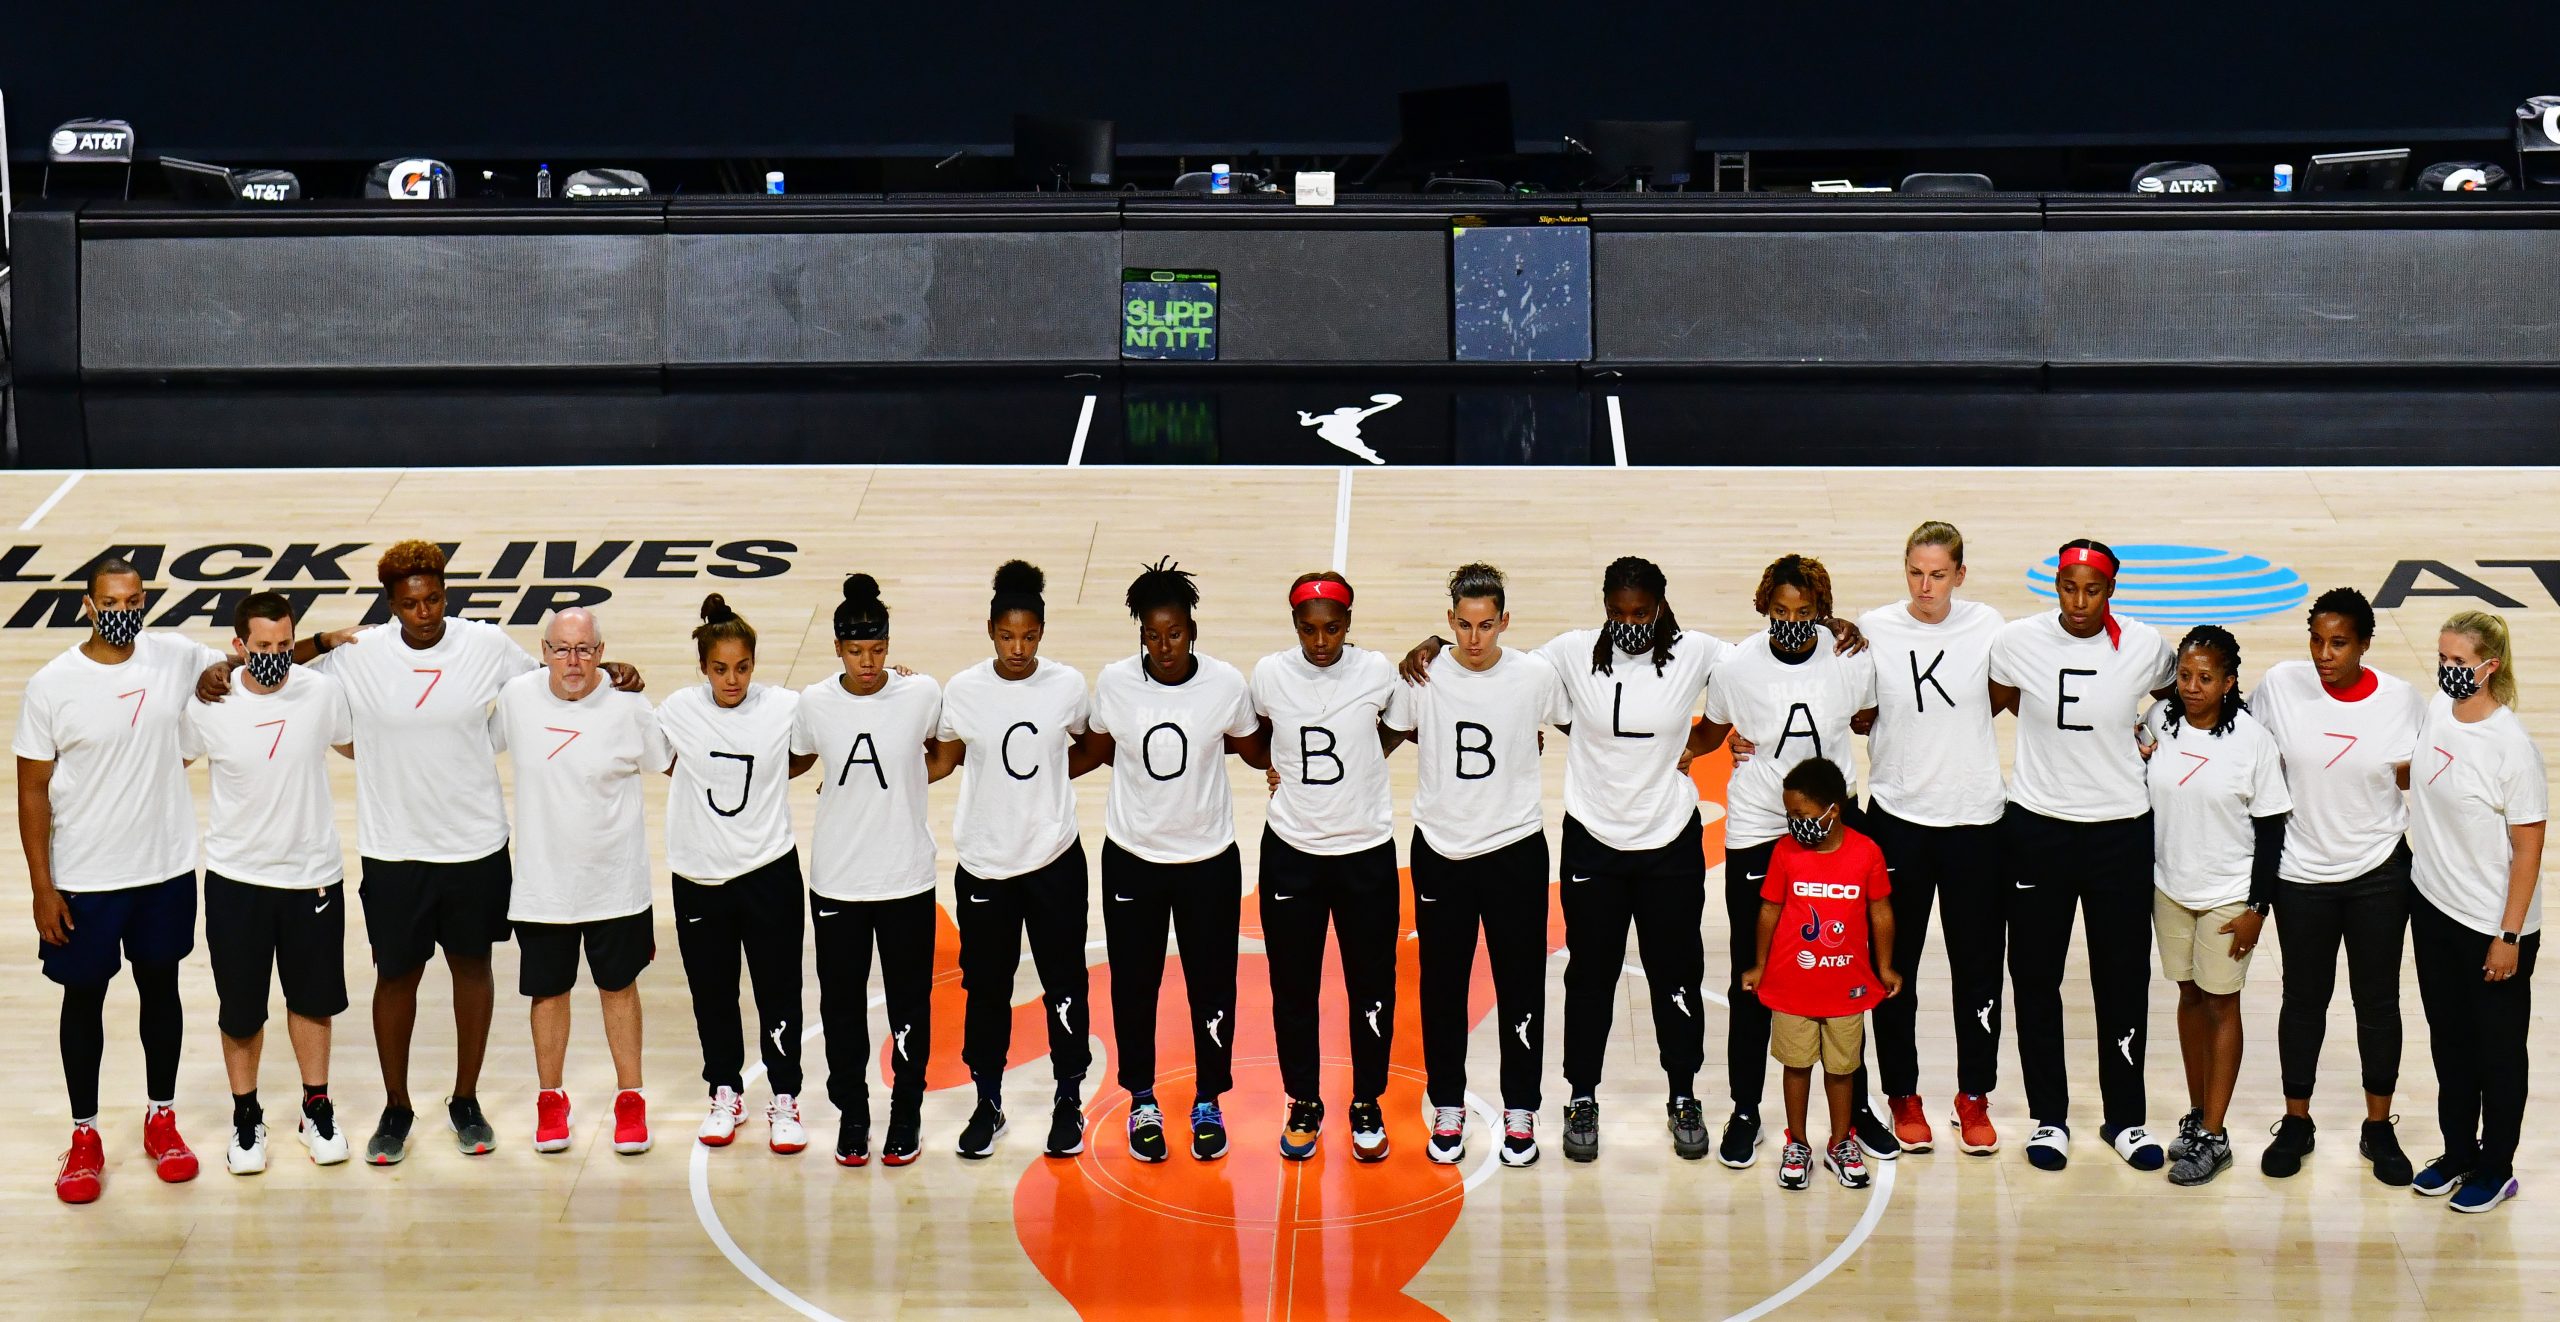 PALMETTO, FLORIDA - AUGUST 26: After the WNBA announcement of the postponed games for the evening, the Washington Mystics each wear white T-shirts with seven bullets on the back protesting the shooting of Jacob Blake by Kenosha, Wisconsin police at Feld Entertainment Center on August 26, 2020 in Palmetto, Florida. NOTE TO USER: User expressly acknowledges and agrees that, by downloading and or using this photograph, User is consenting to the terms and conditions of the Getty Images License Agreement. (Photo by Julio Aguilar/Getty Images)